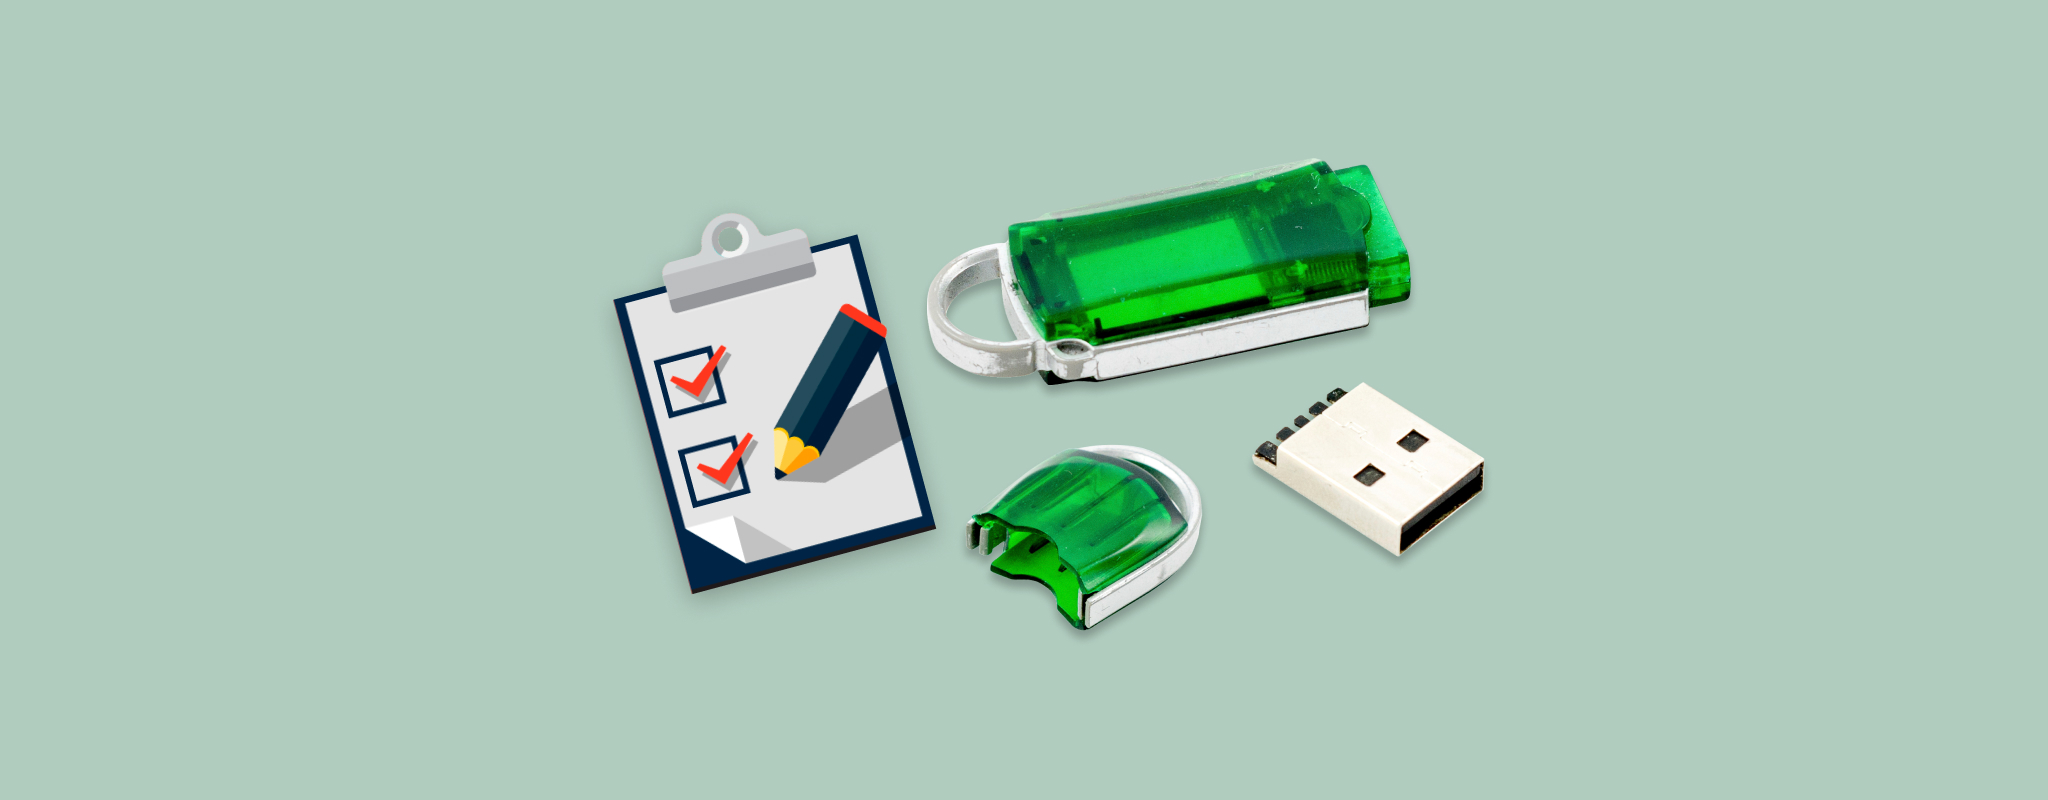 recover data from corrupted usb drive